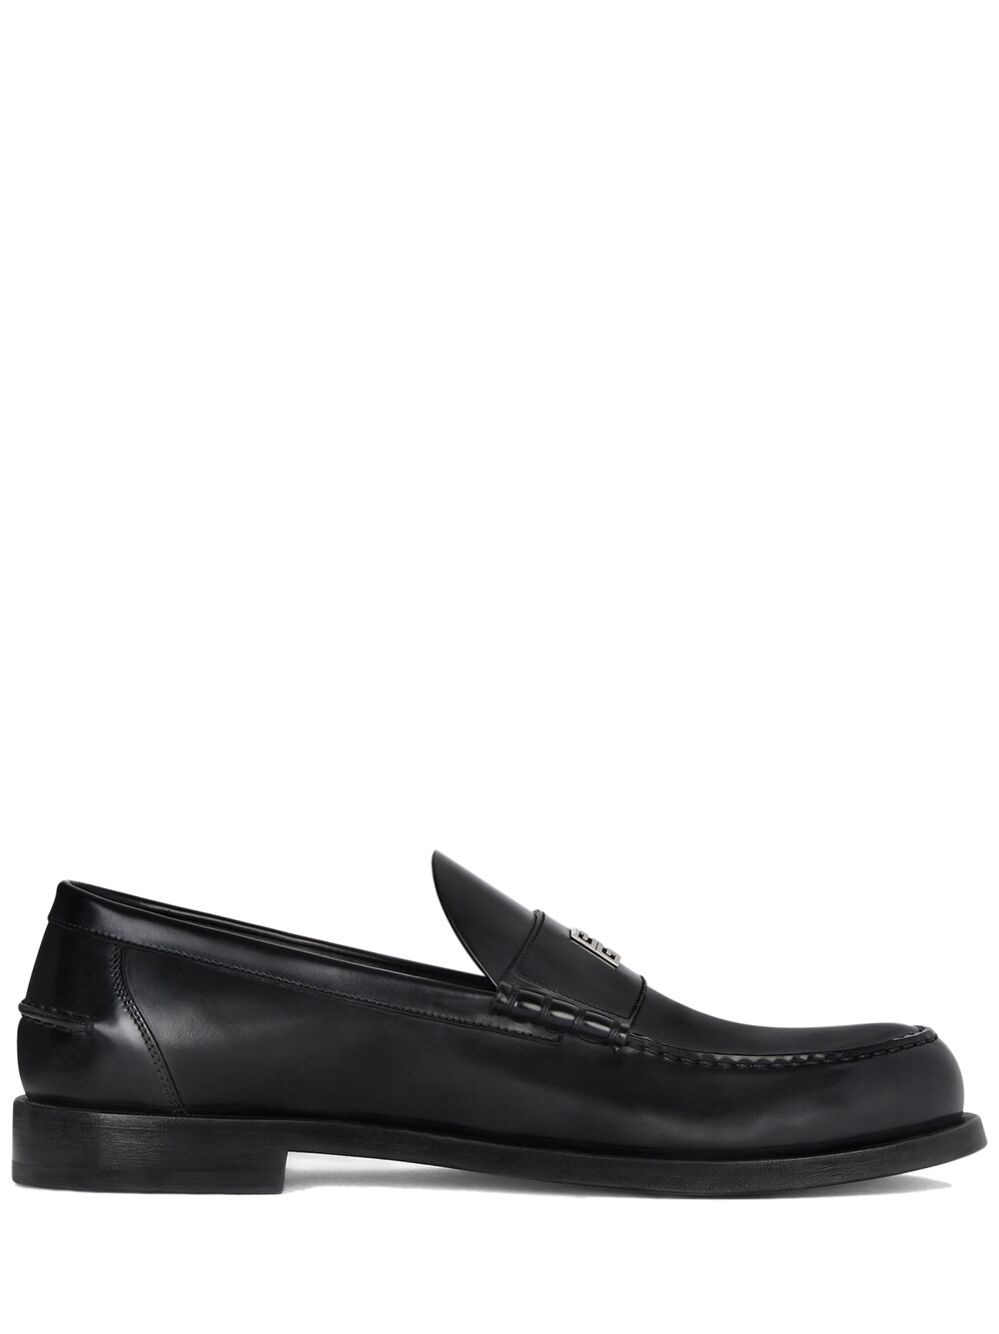 Mr g loafers in leather - 1